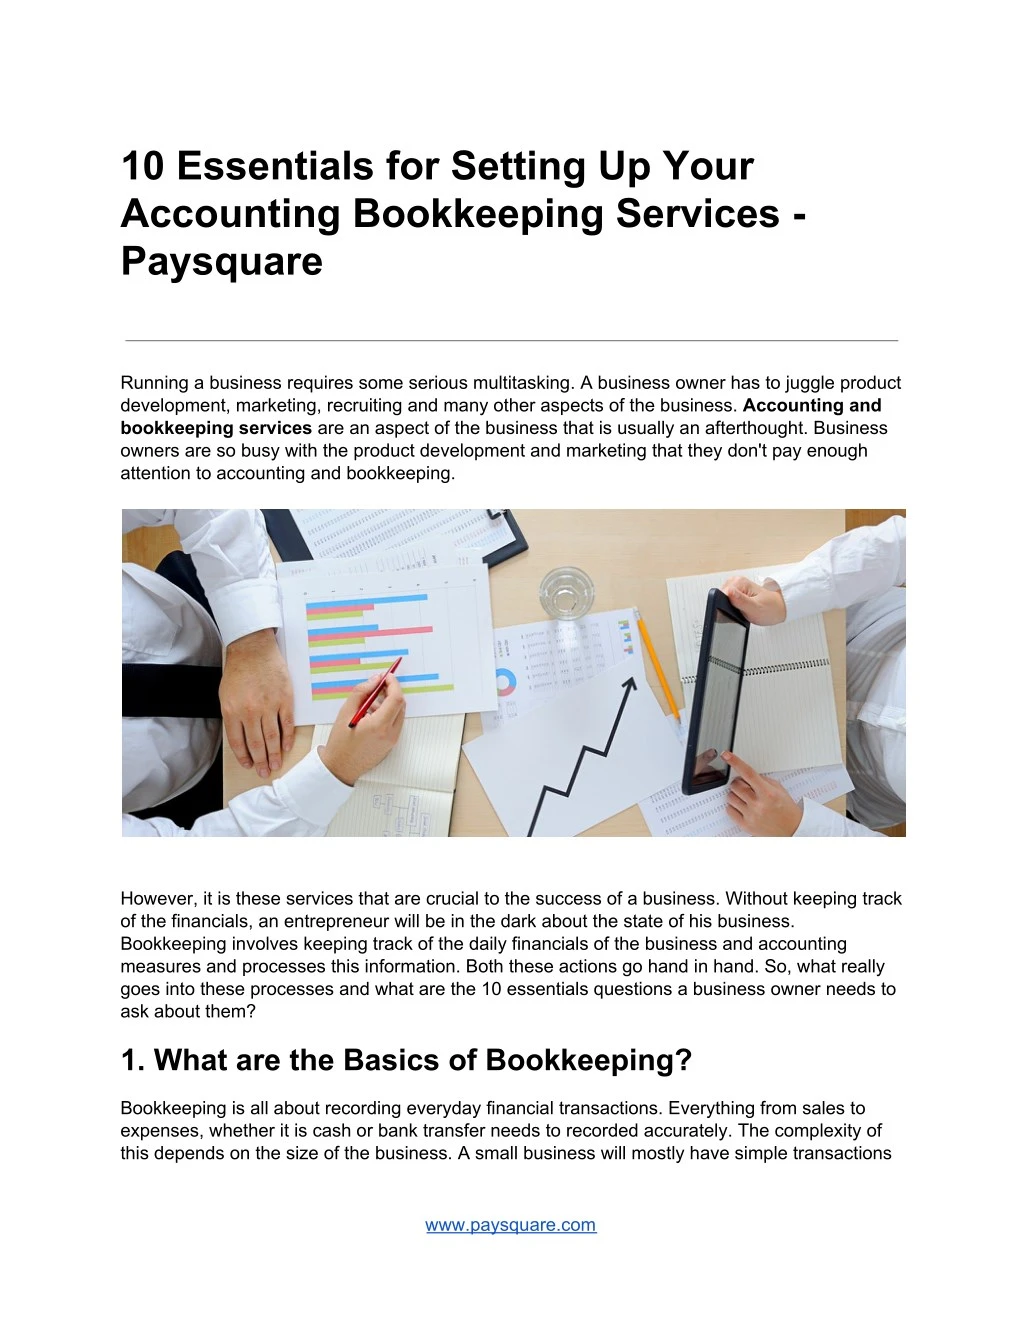 10 essentials for setting up your accounting